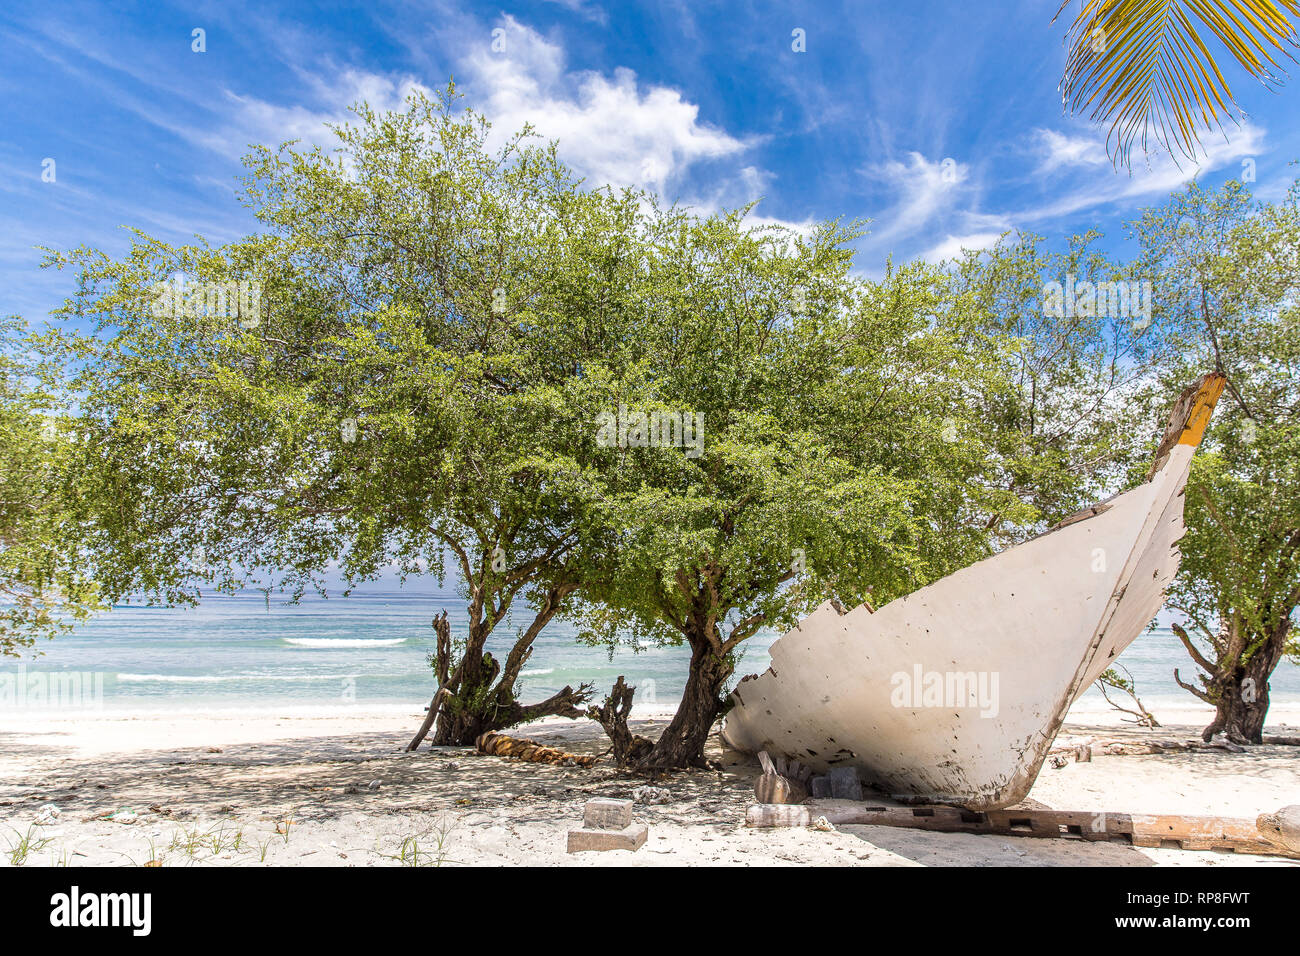 Indonesia, the old white boat on the waterfront on the island of Gili Trawangan and the dragon-like tree. Stock Photo